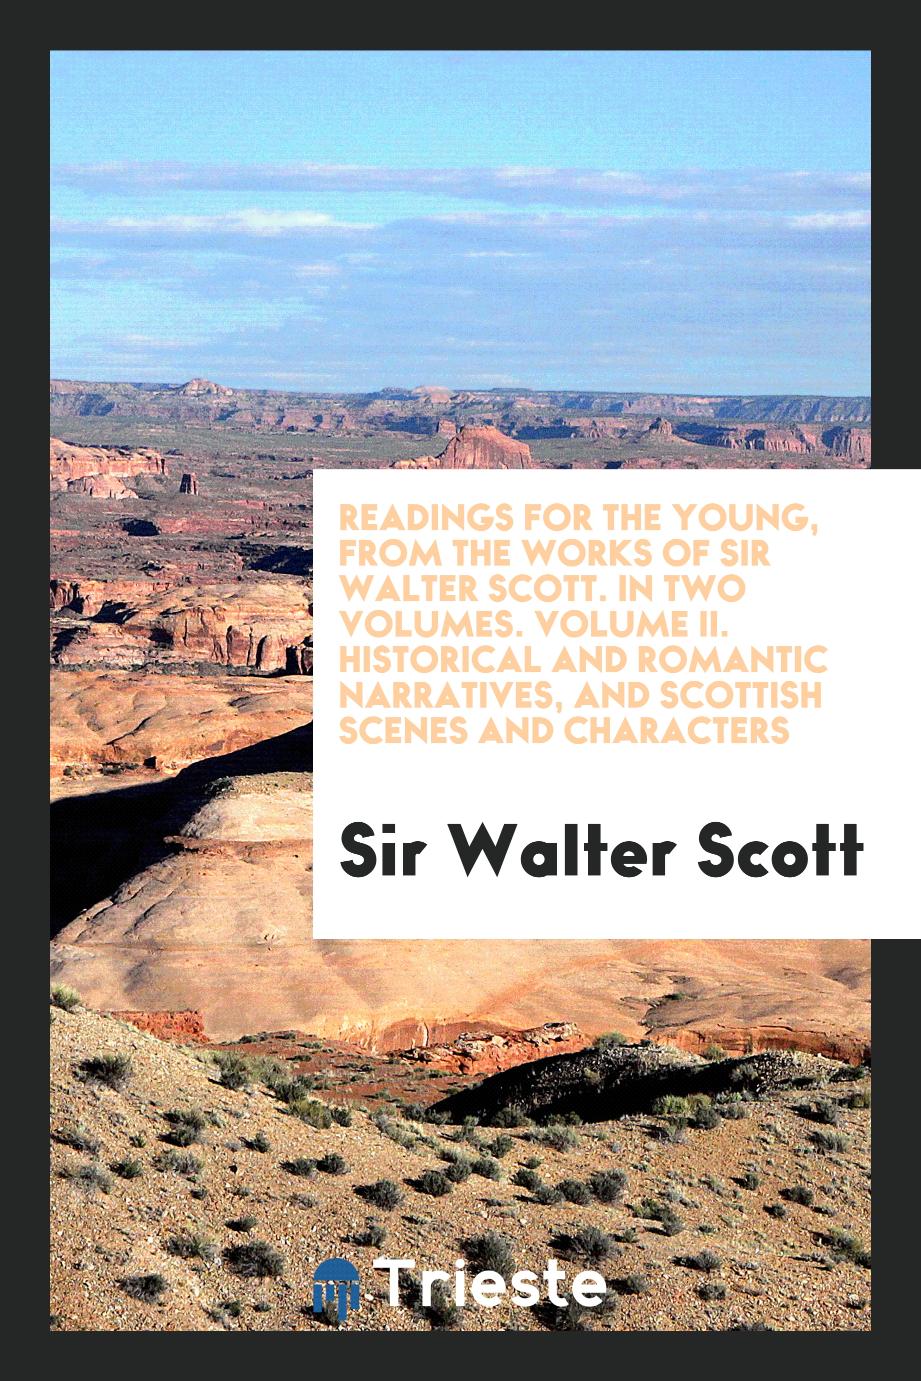 Readings for the Young, from the Works of Sir Walter Scott. In Two Volumes. Volume II. Historical and Romantic Narratives, and Scottish Scenes and Characters